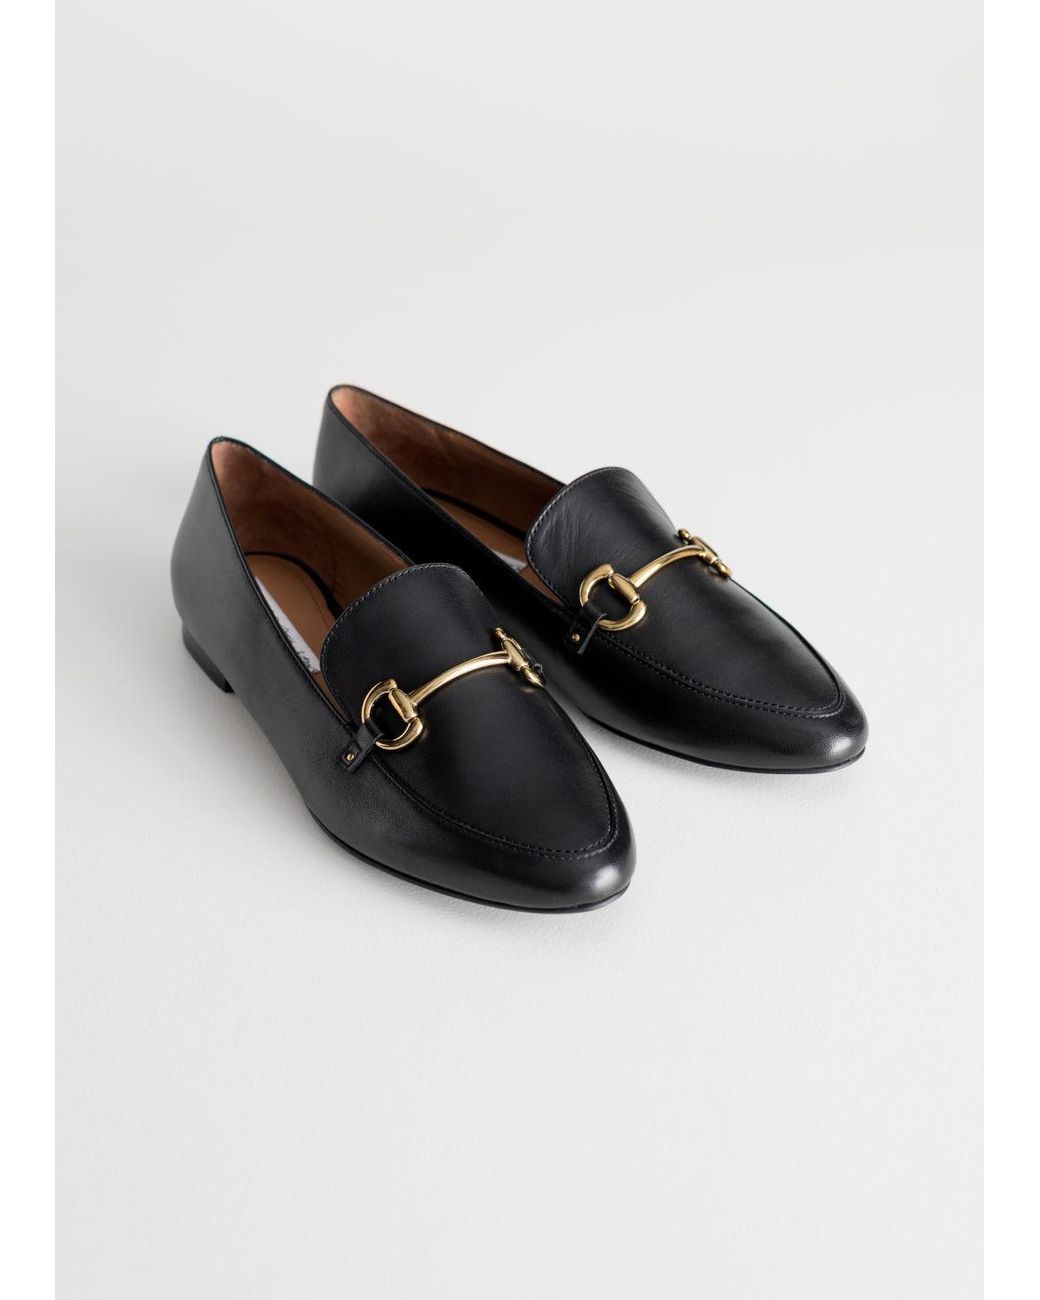 Equestrian Buckle Loafers in Black 